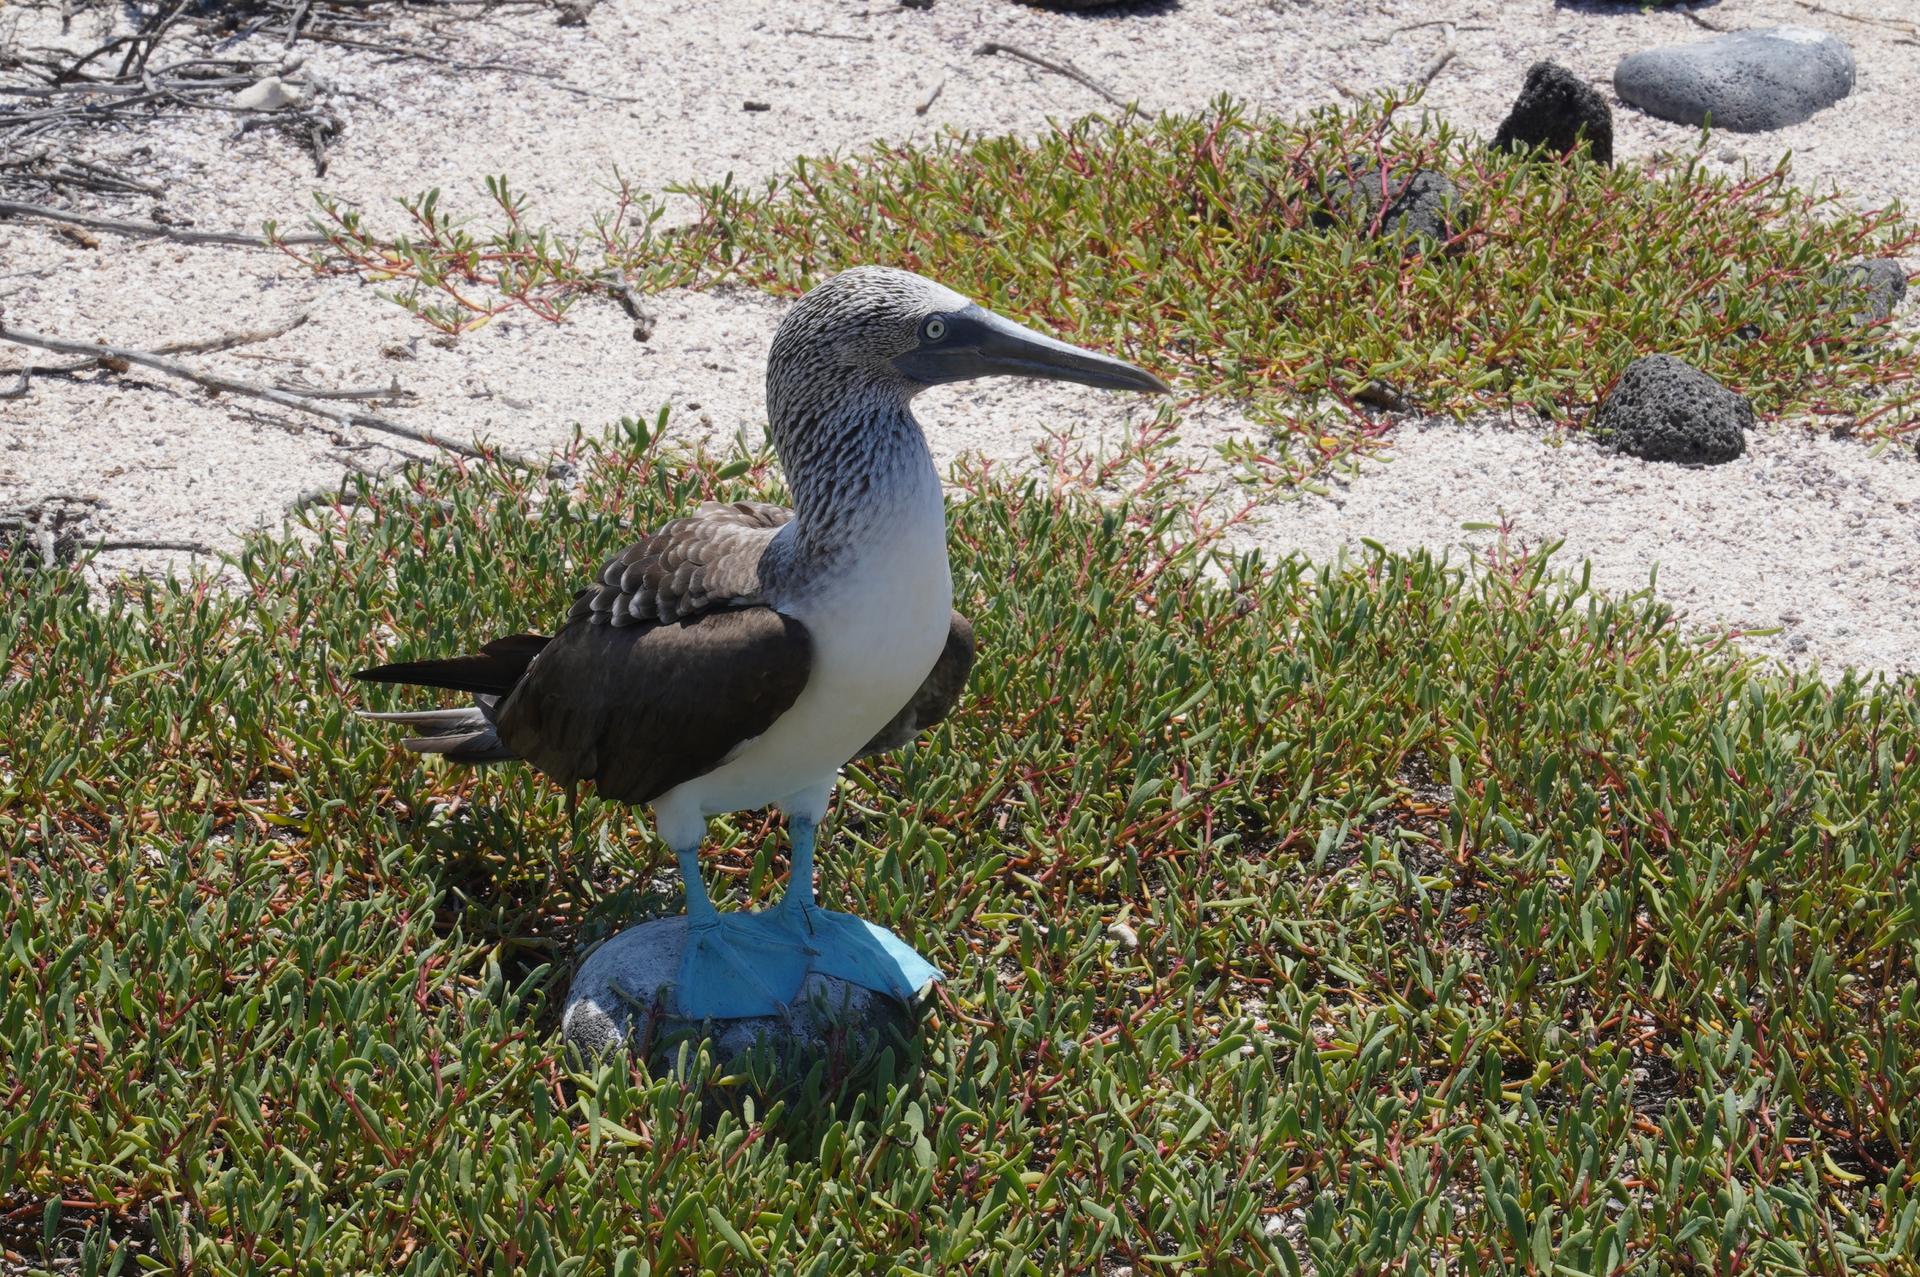 The blue-footed booby is a tourists' favorite on the Galápagos Islands.